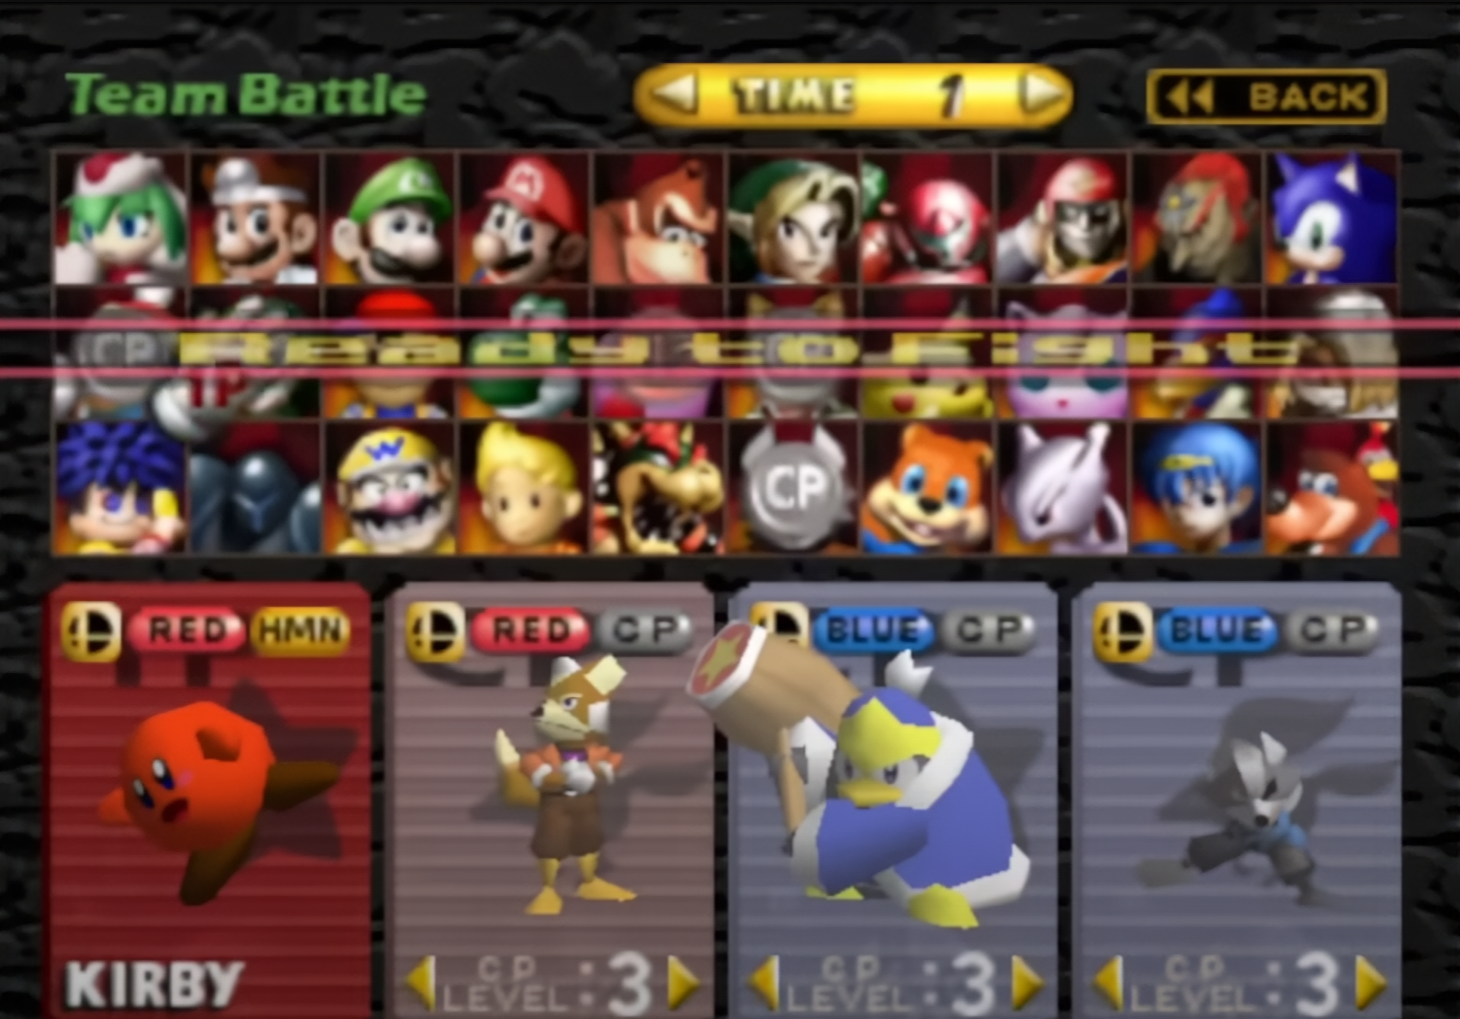 Footage of Smash Remix Version 1.5.0, which boasts 30 character slots and runs on real N64 hardware with an Expansion Pak.